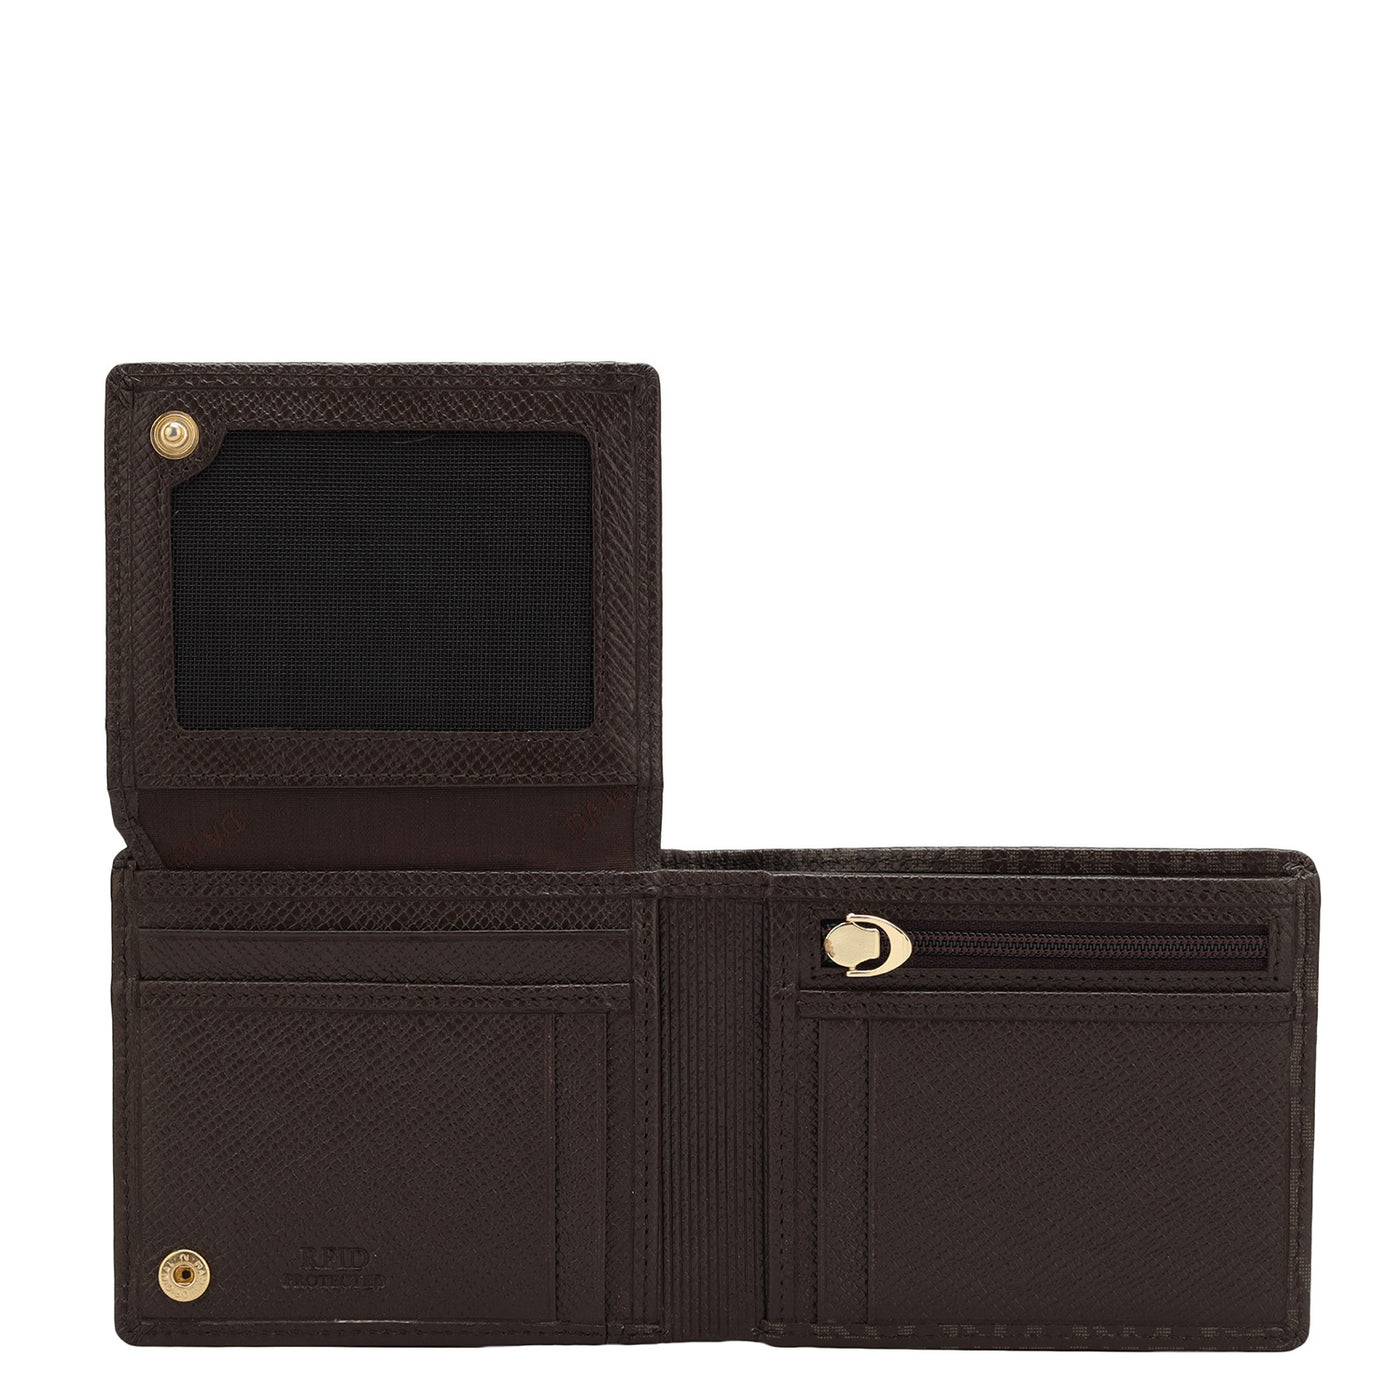 Franzy Monogram Leather Mens Wallet - Chocolate